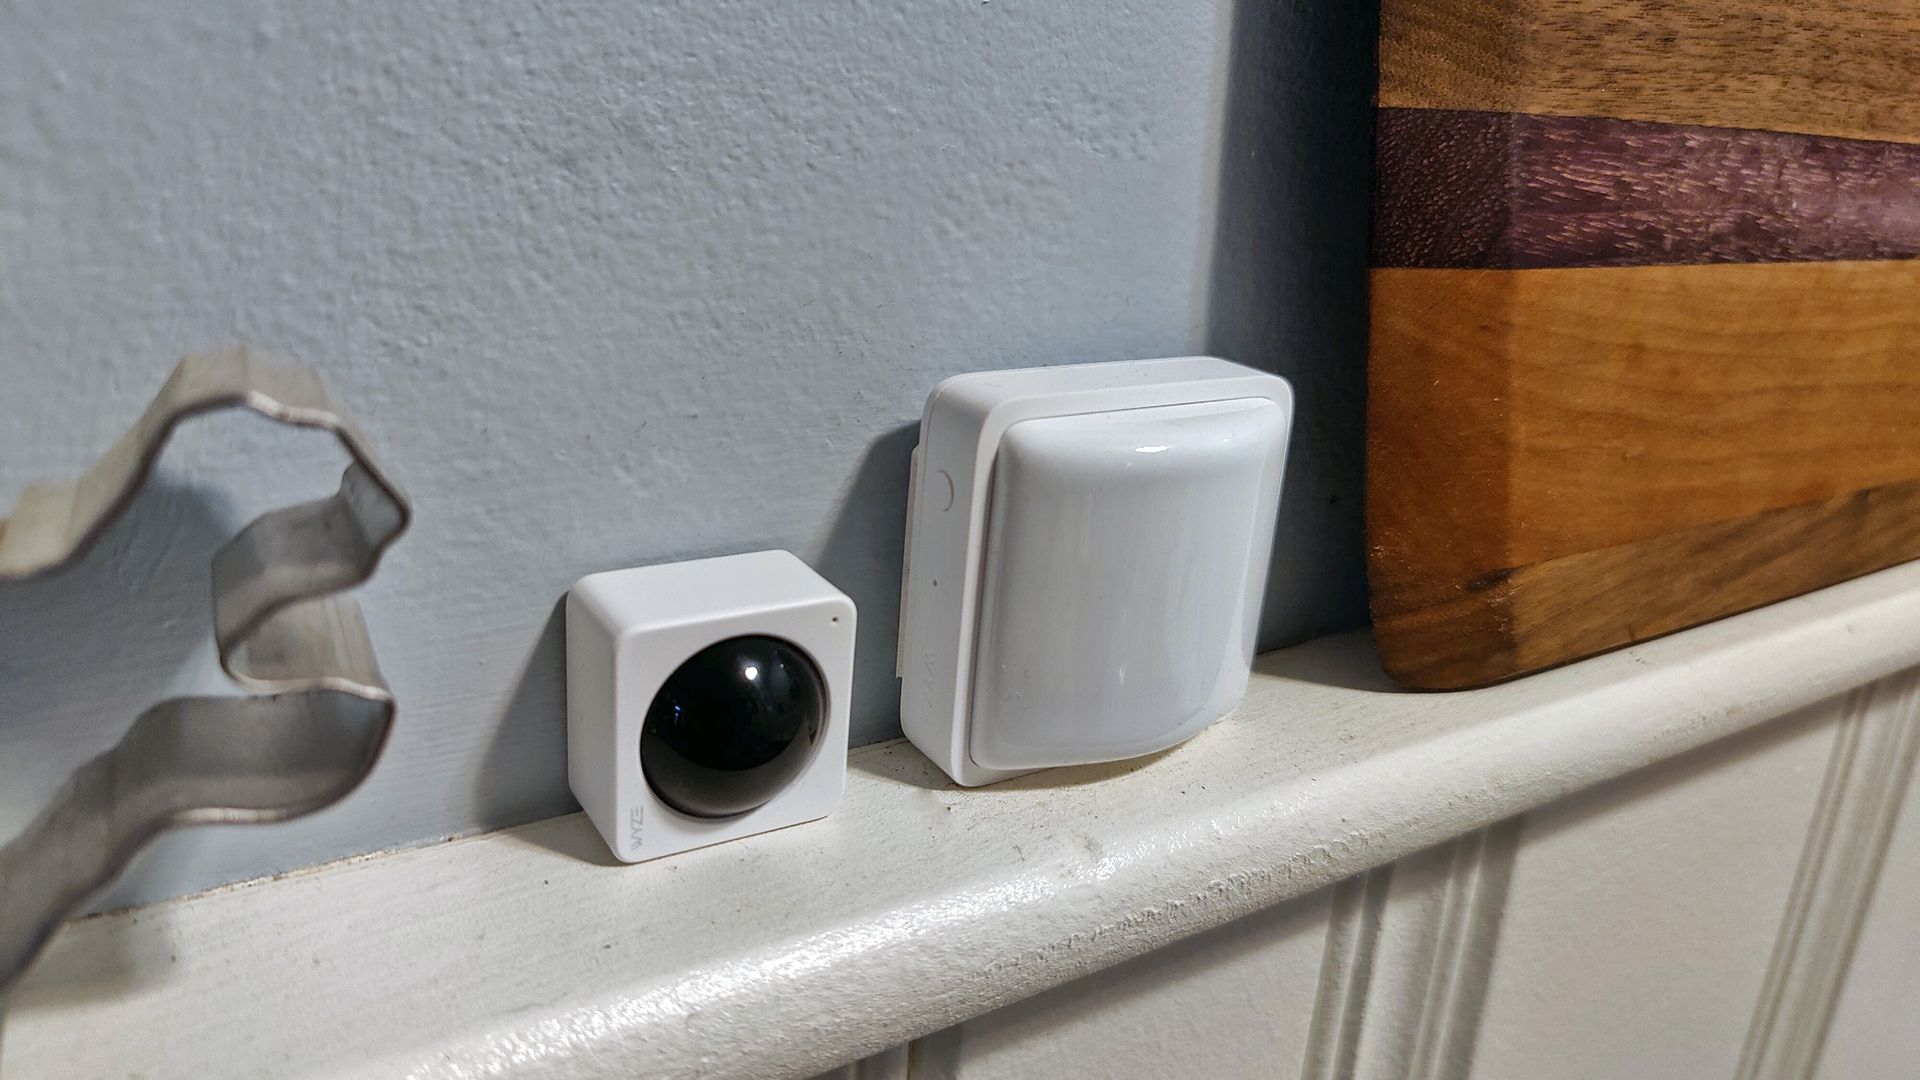 Wyze's Home Monitoring camera a motion system on a shelf.